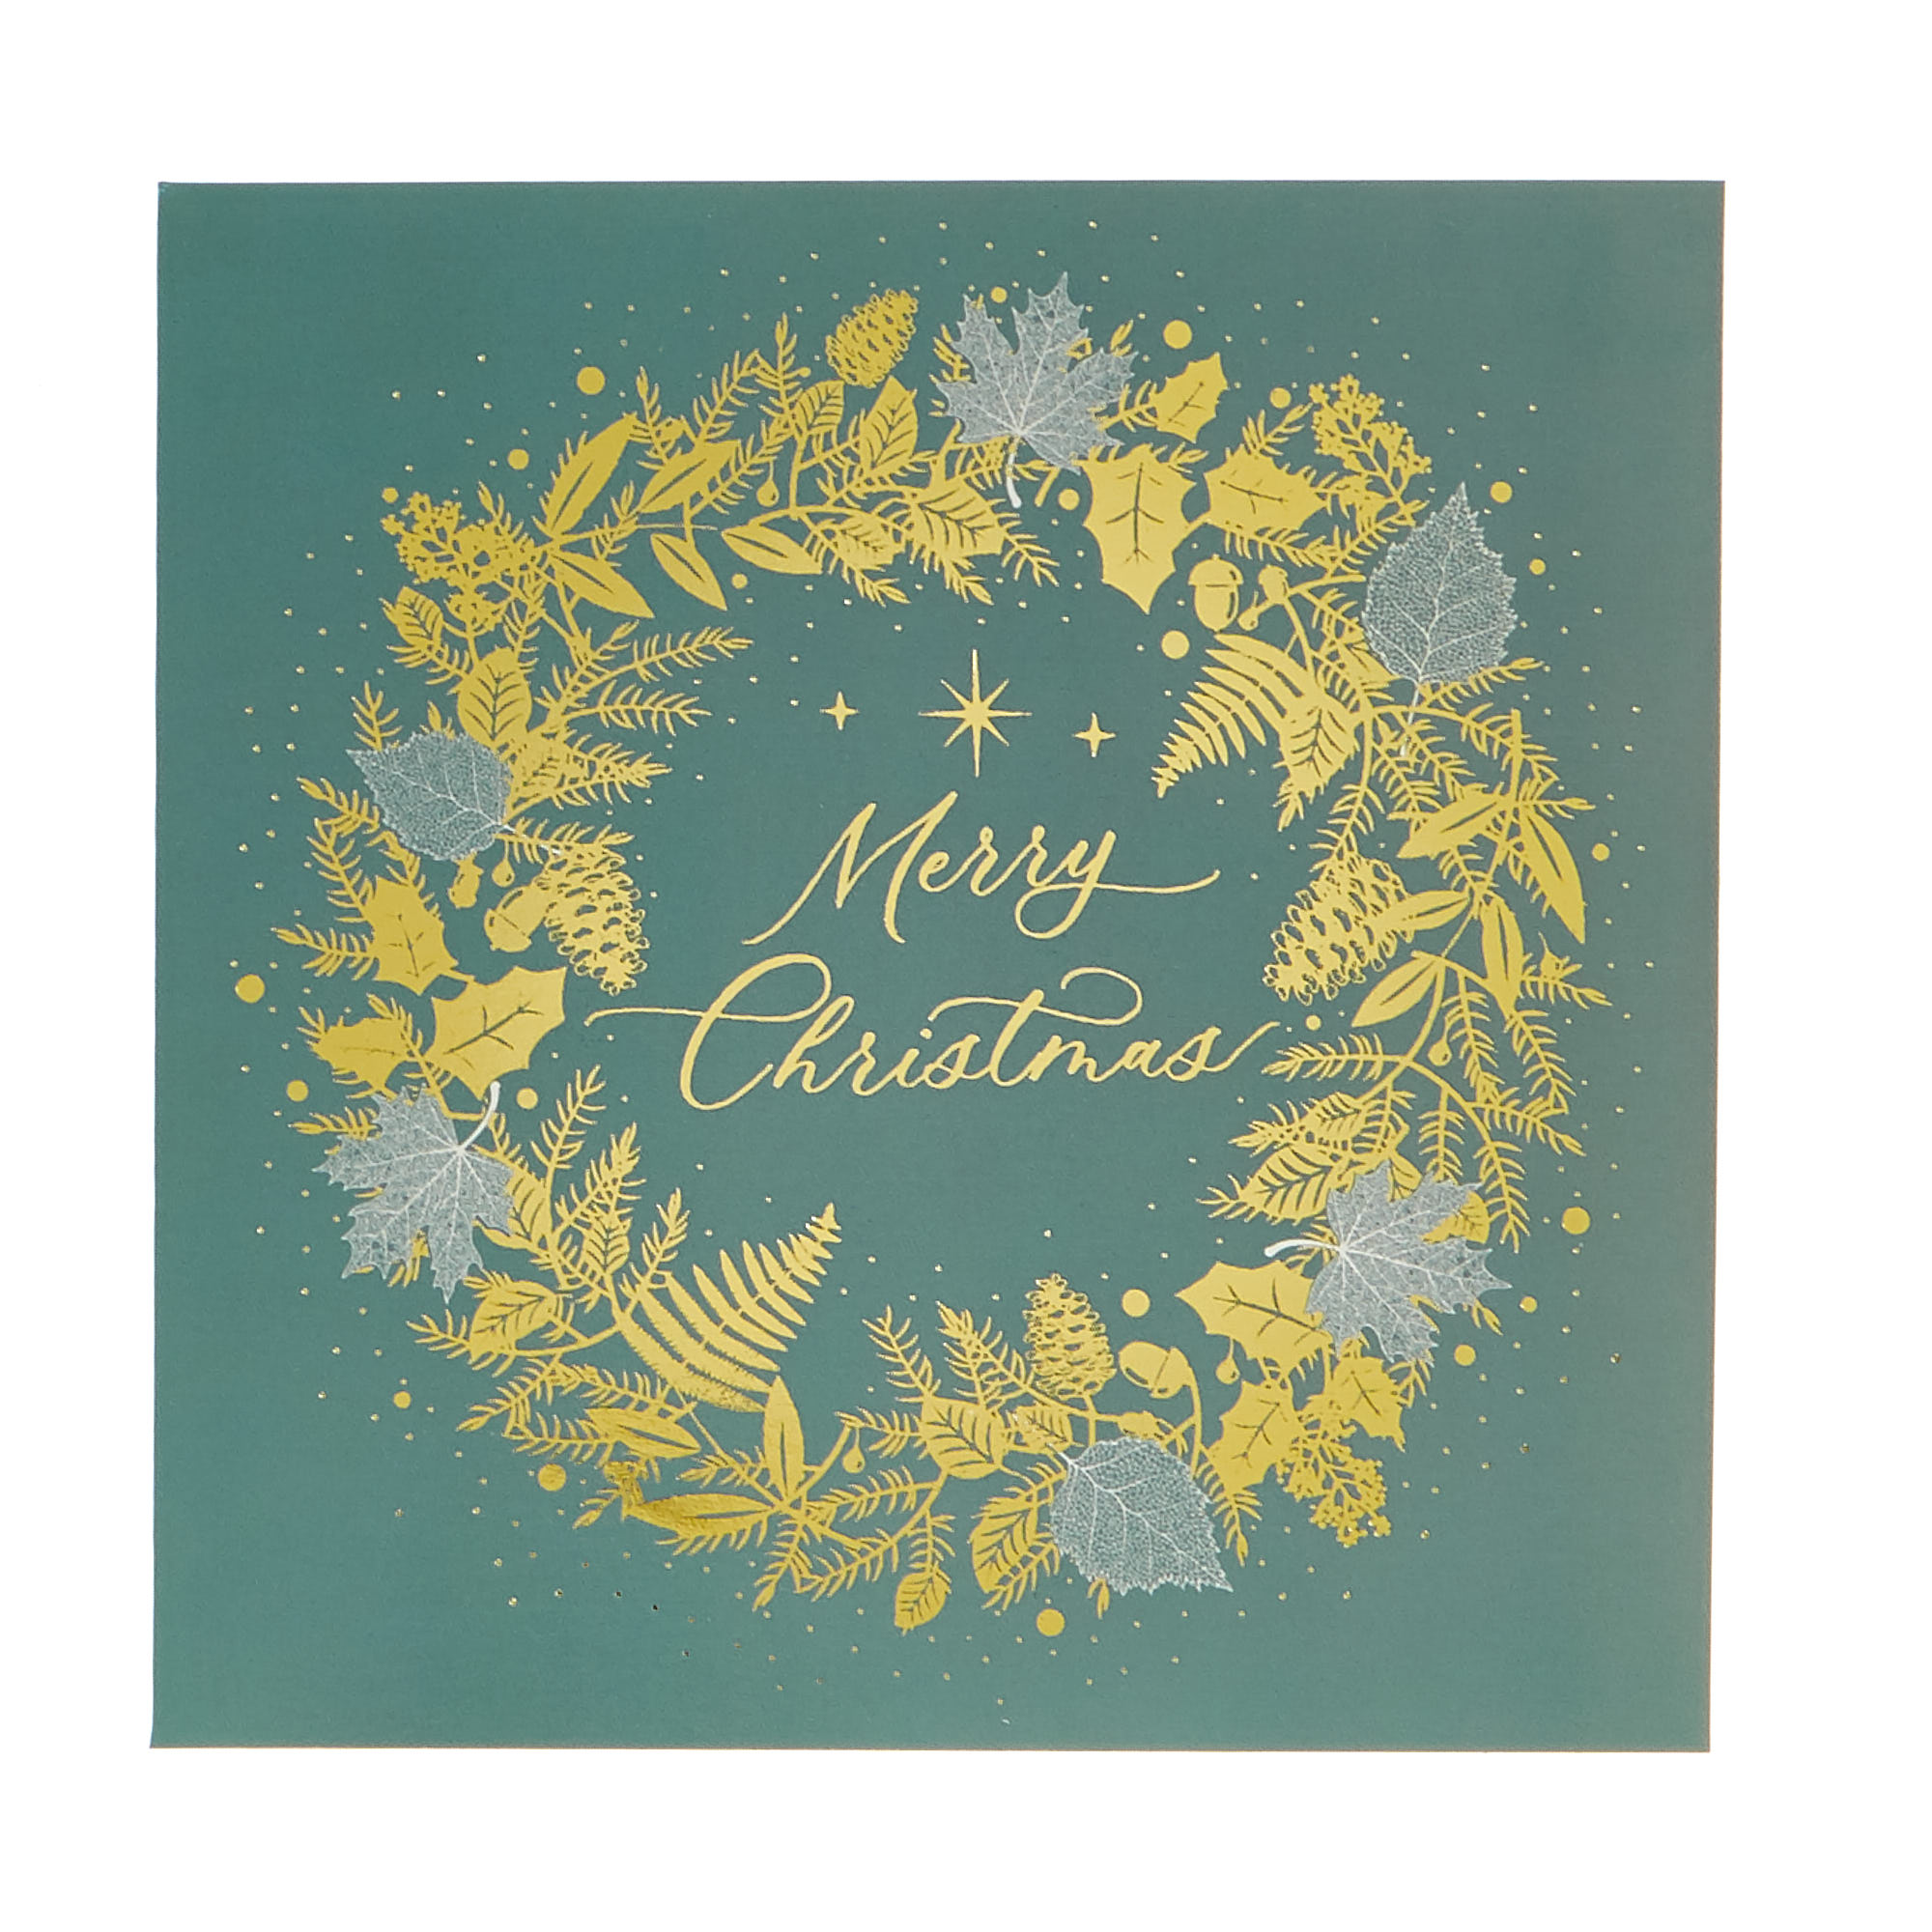 18 Charity Christmas Cards - Green & Gold (2 Designs)